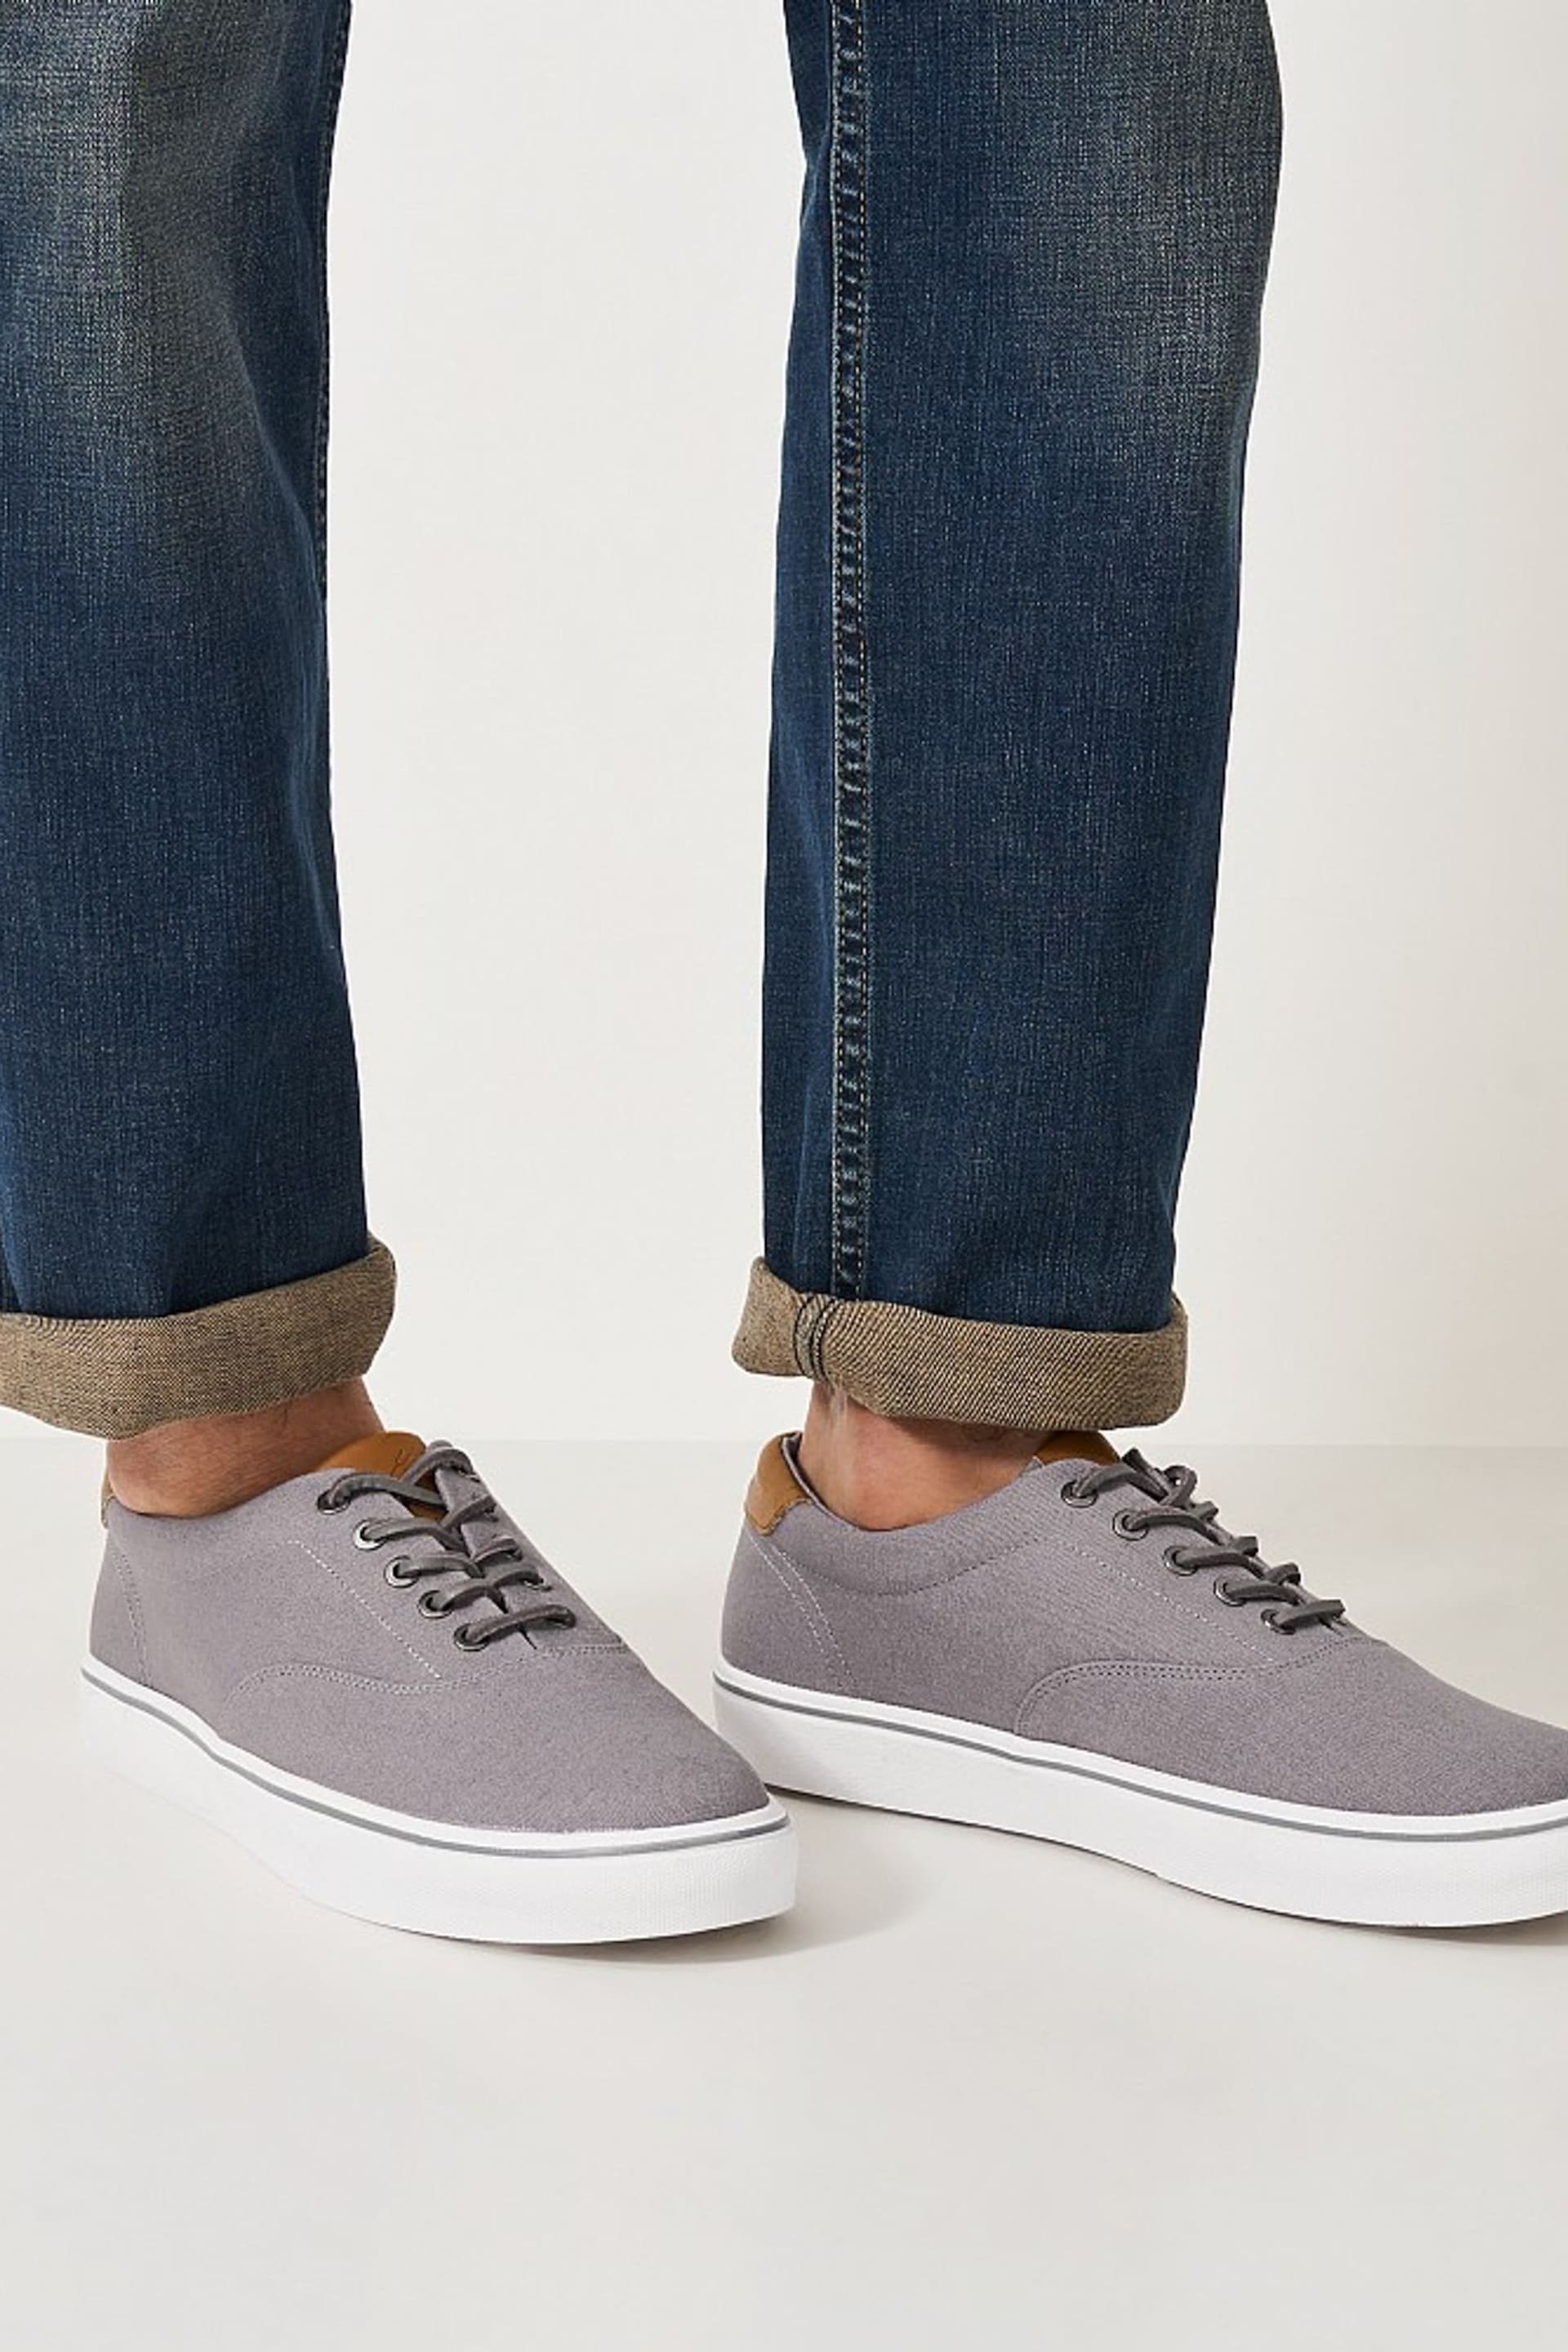 Crew Clothing Oxford Canvas Trainers - Image 1 of 5